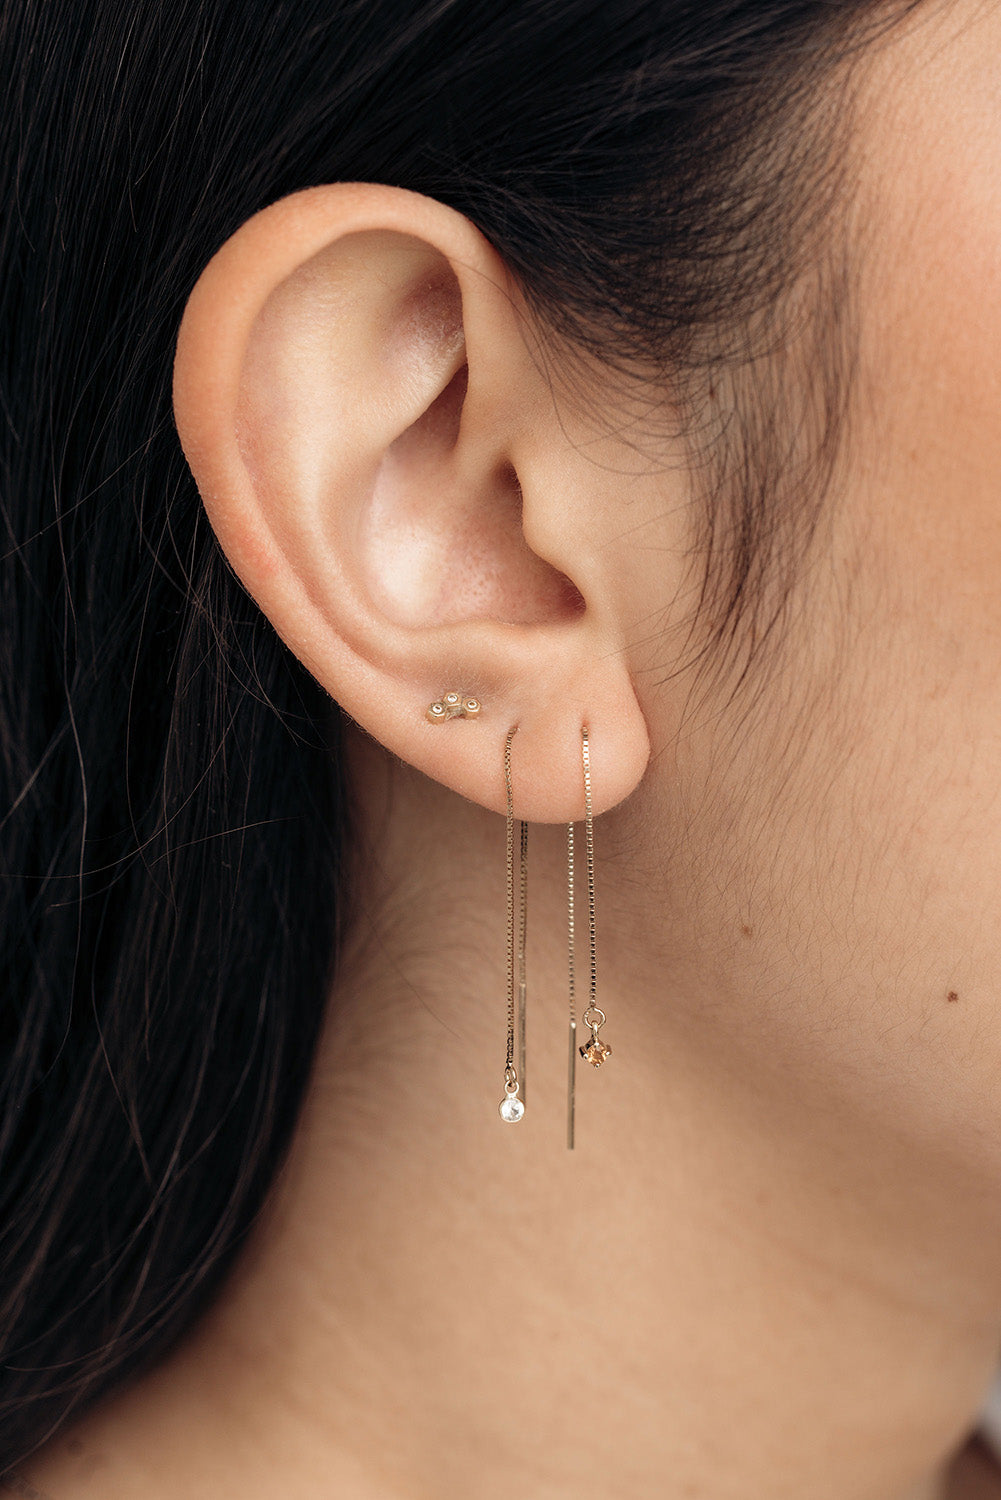 ear threaders with charms